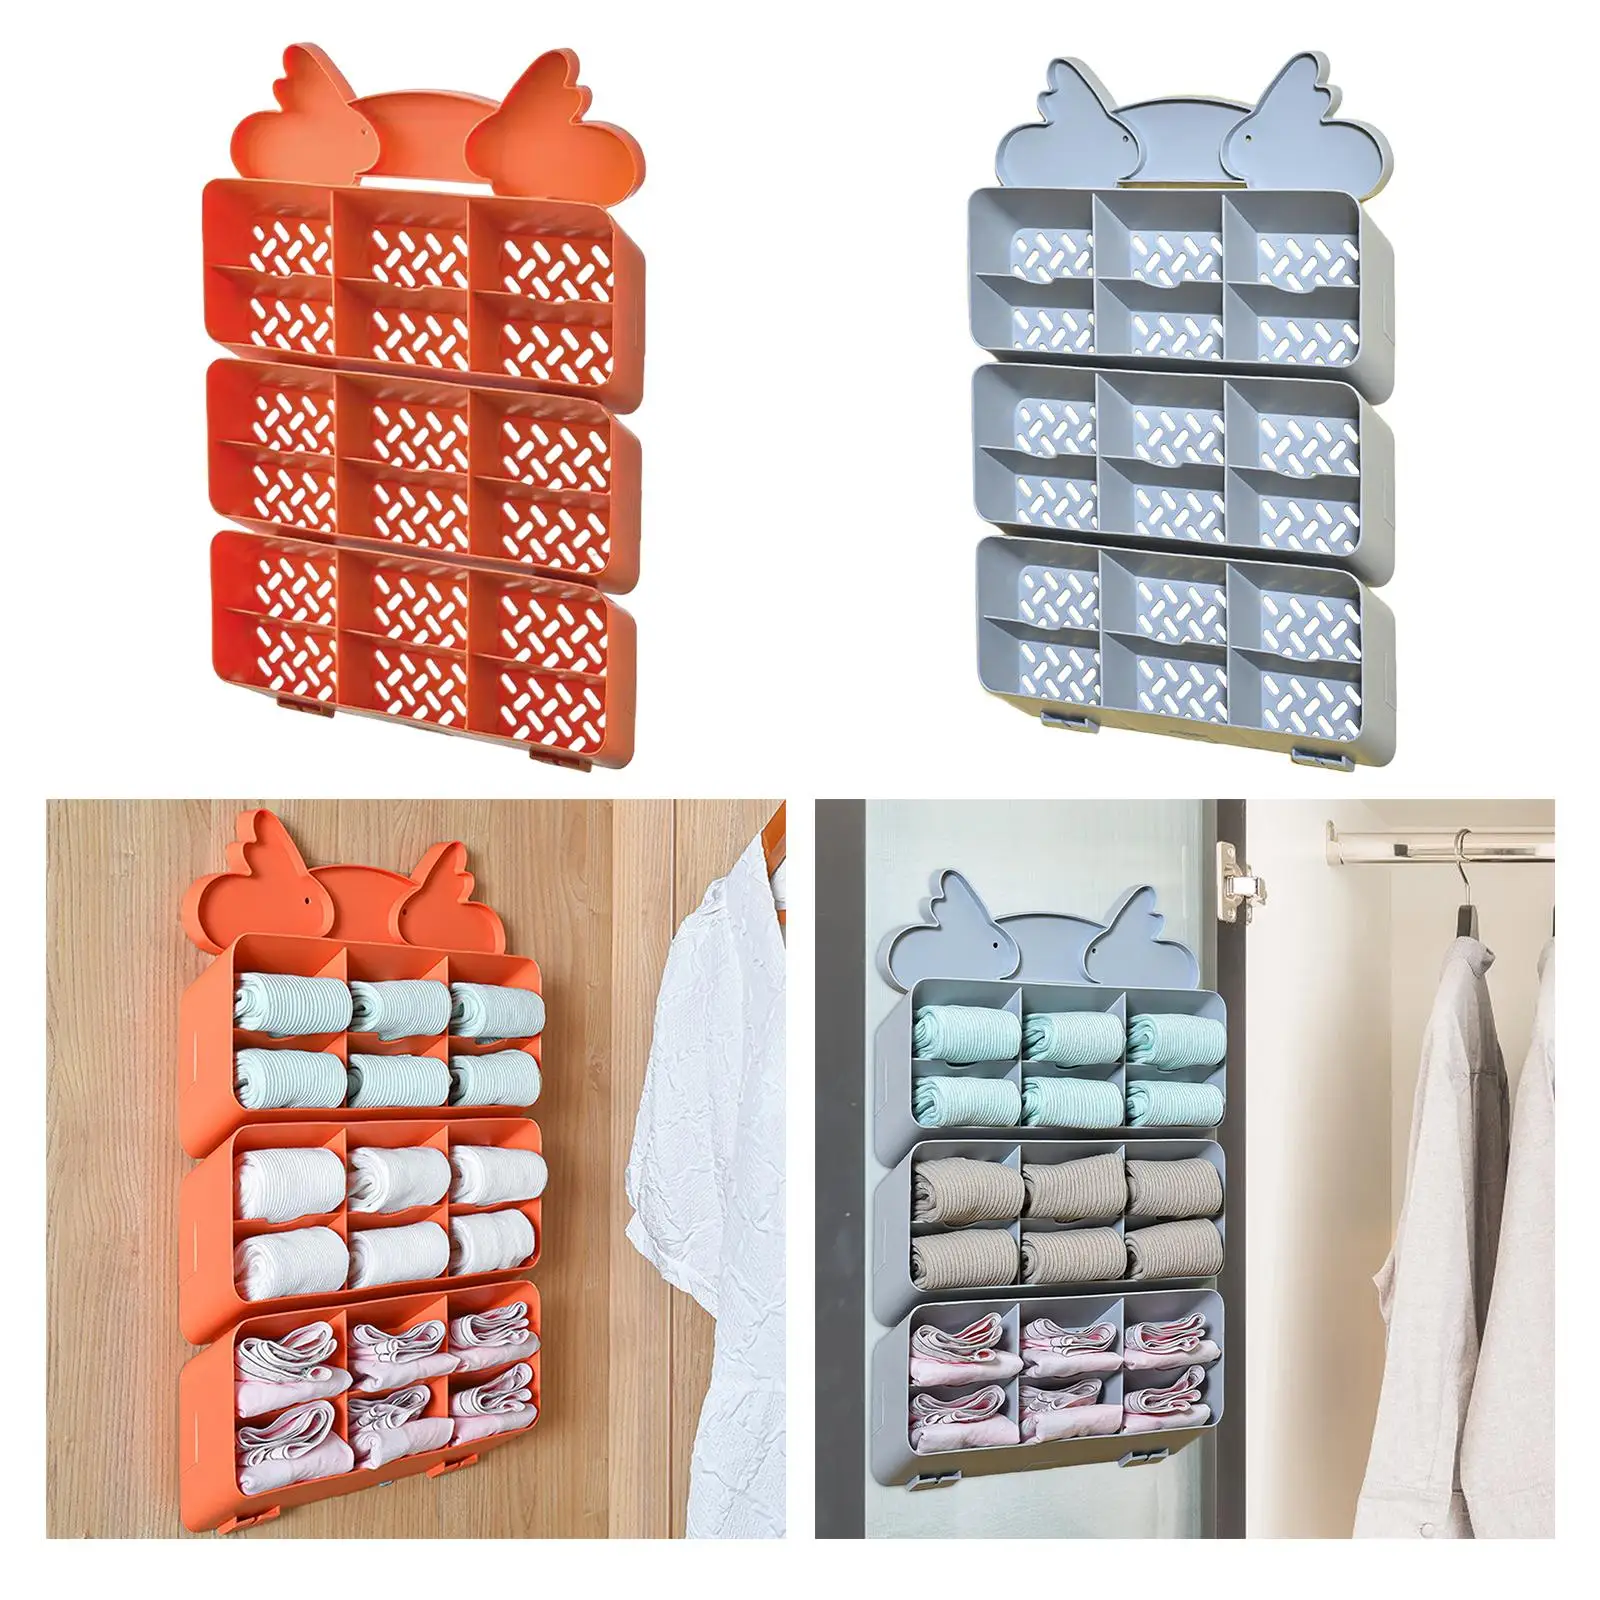 Socks Underwear Storage Hanging 18 Compartments Space Saver Container Closet Hanging Bra Organizer for Wardrobe Home Household